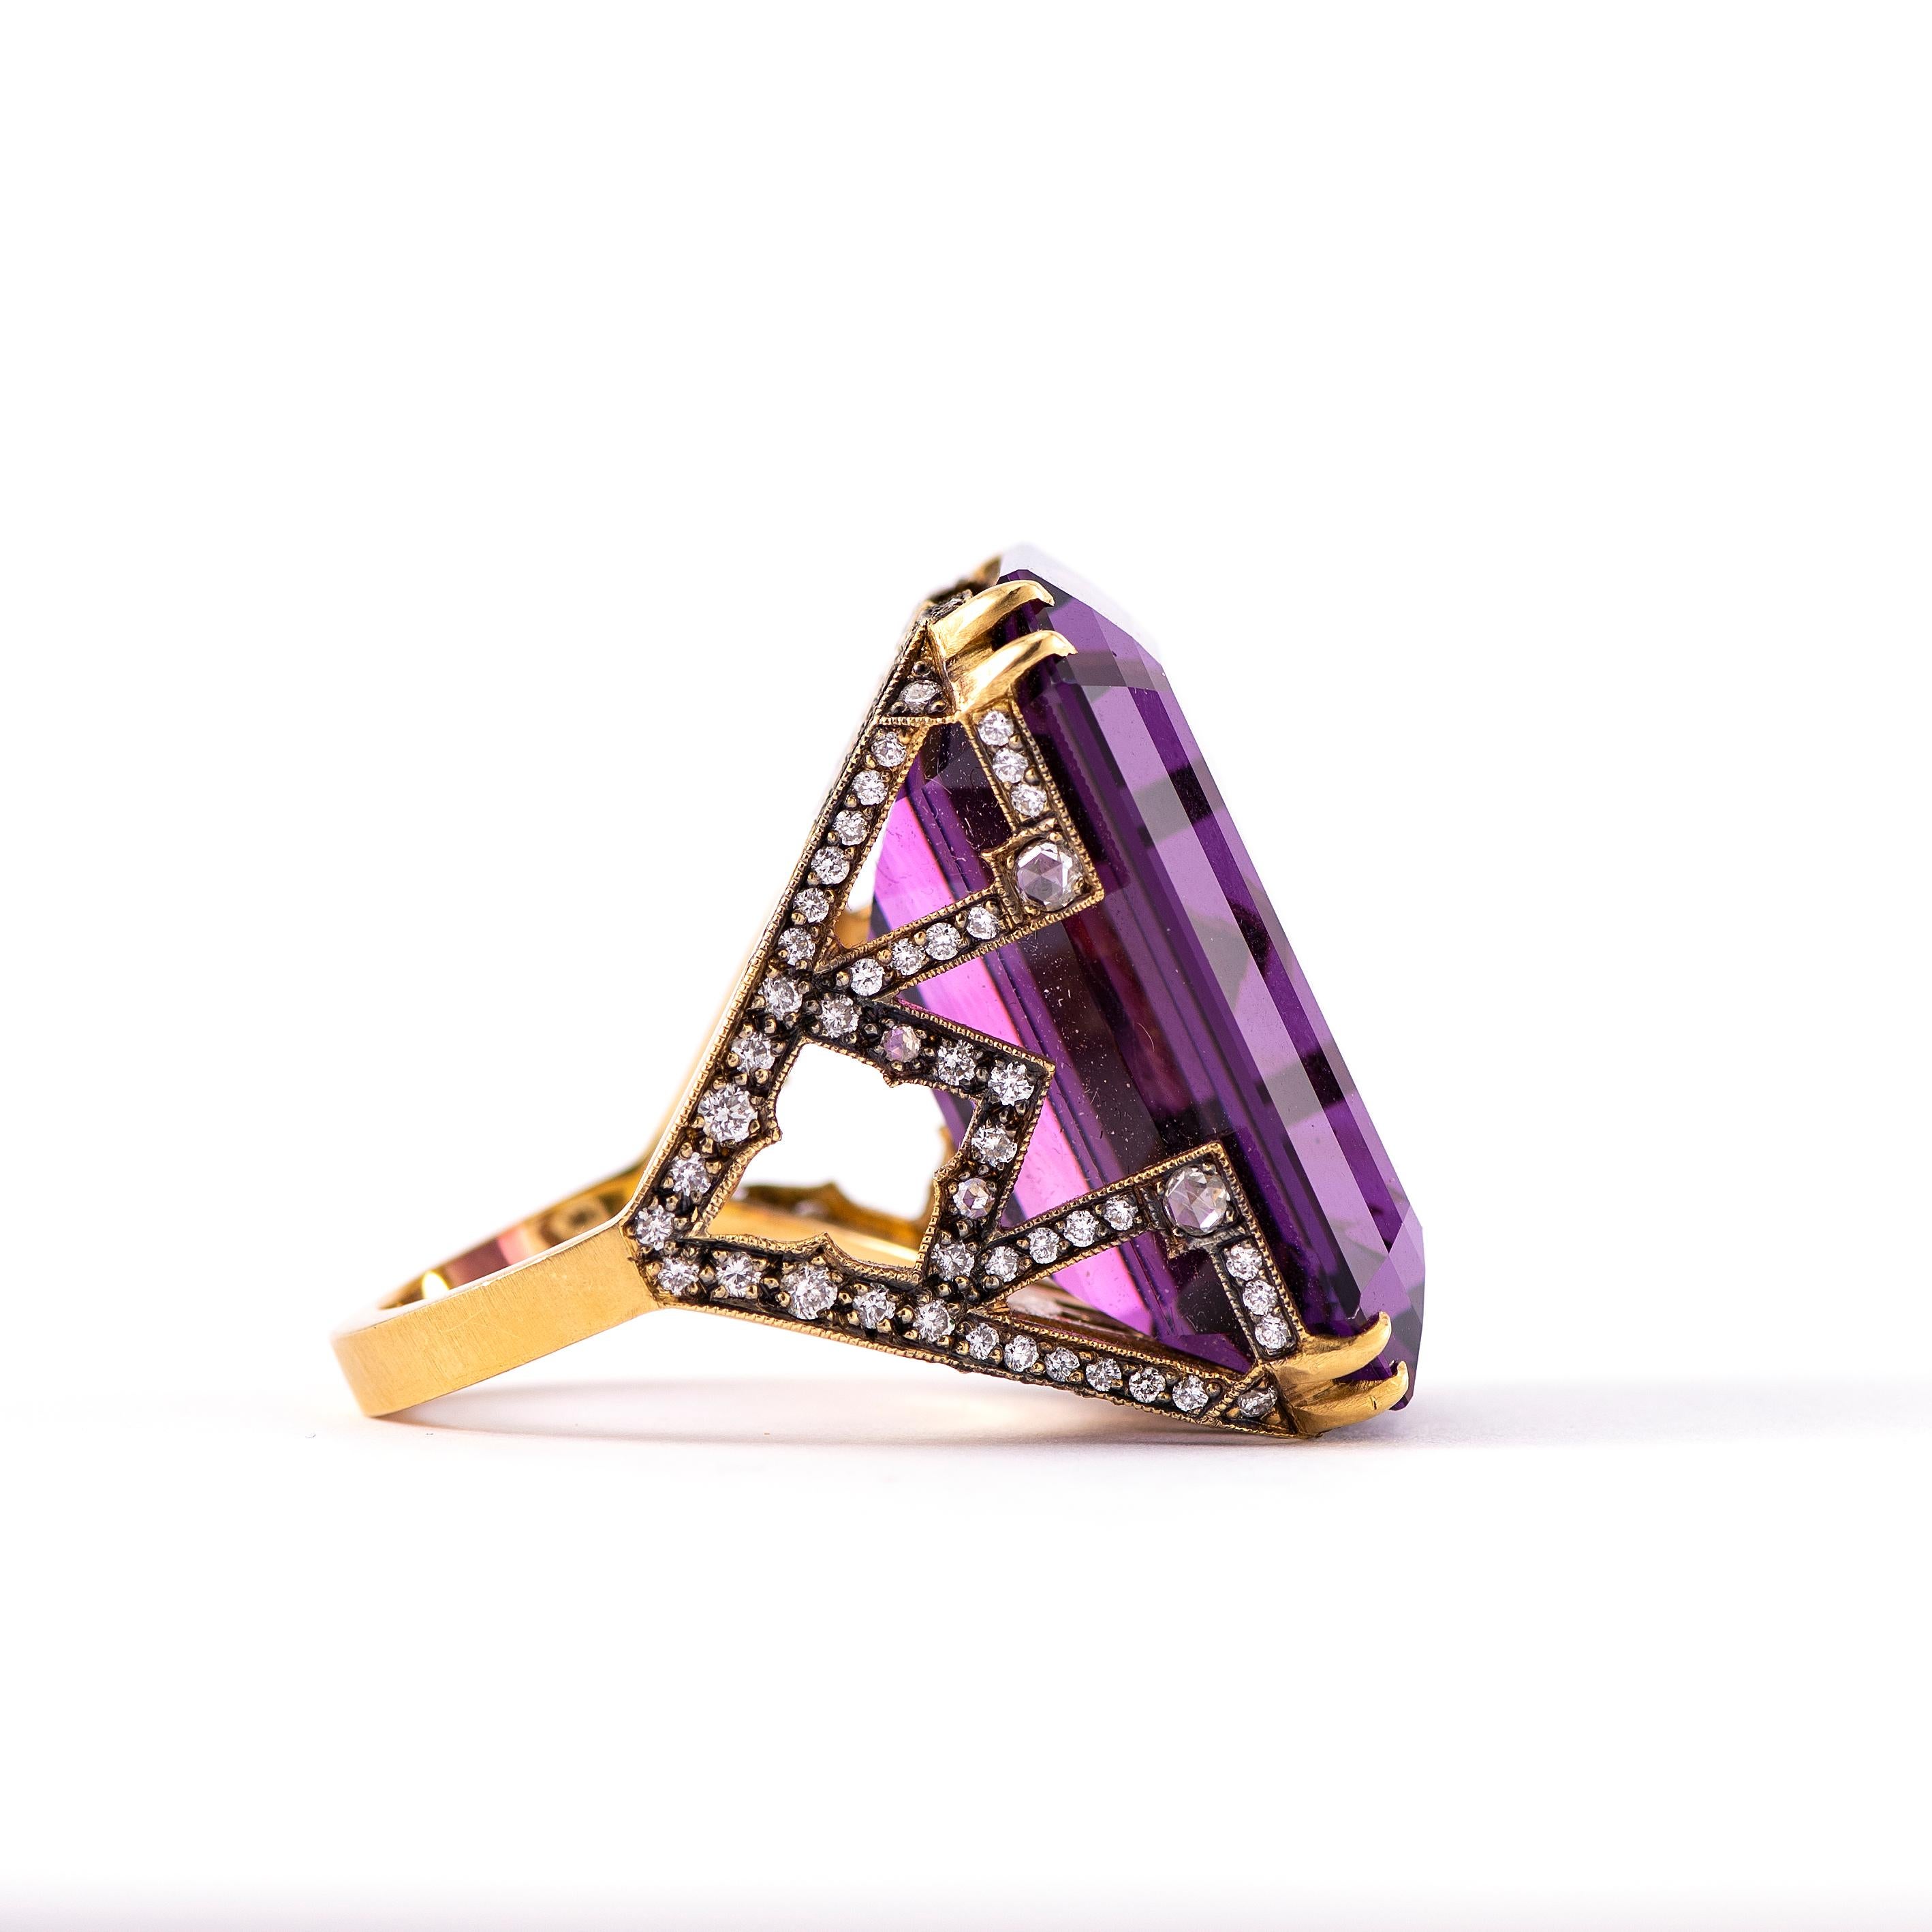 For the person who has everything, enter this unmistakable, eye-catching amethyst cocktail ring.  The emerald cut amethyst is the focal point from the top, but turn to the side and the adventure continues with white diamond pave set in an intricate